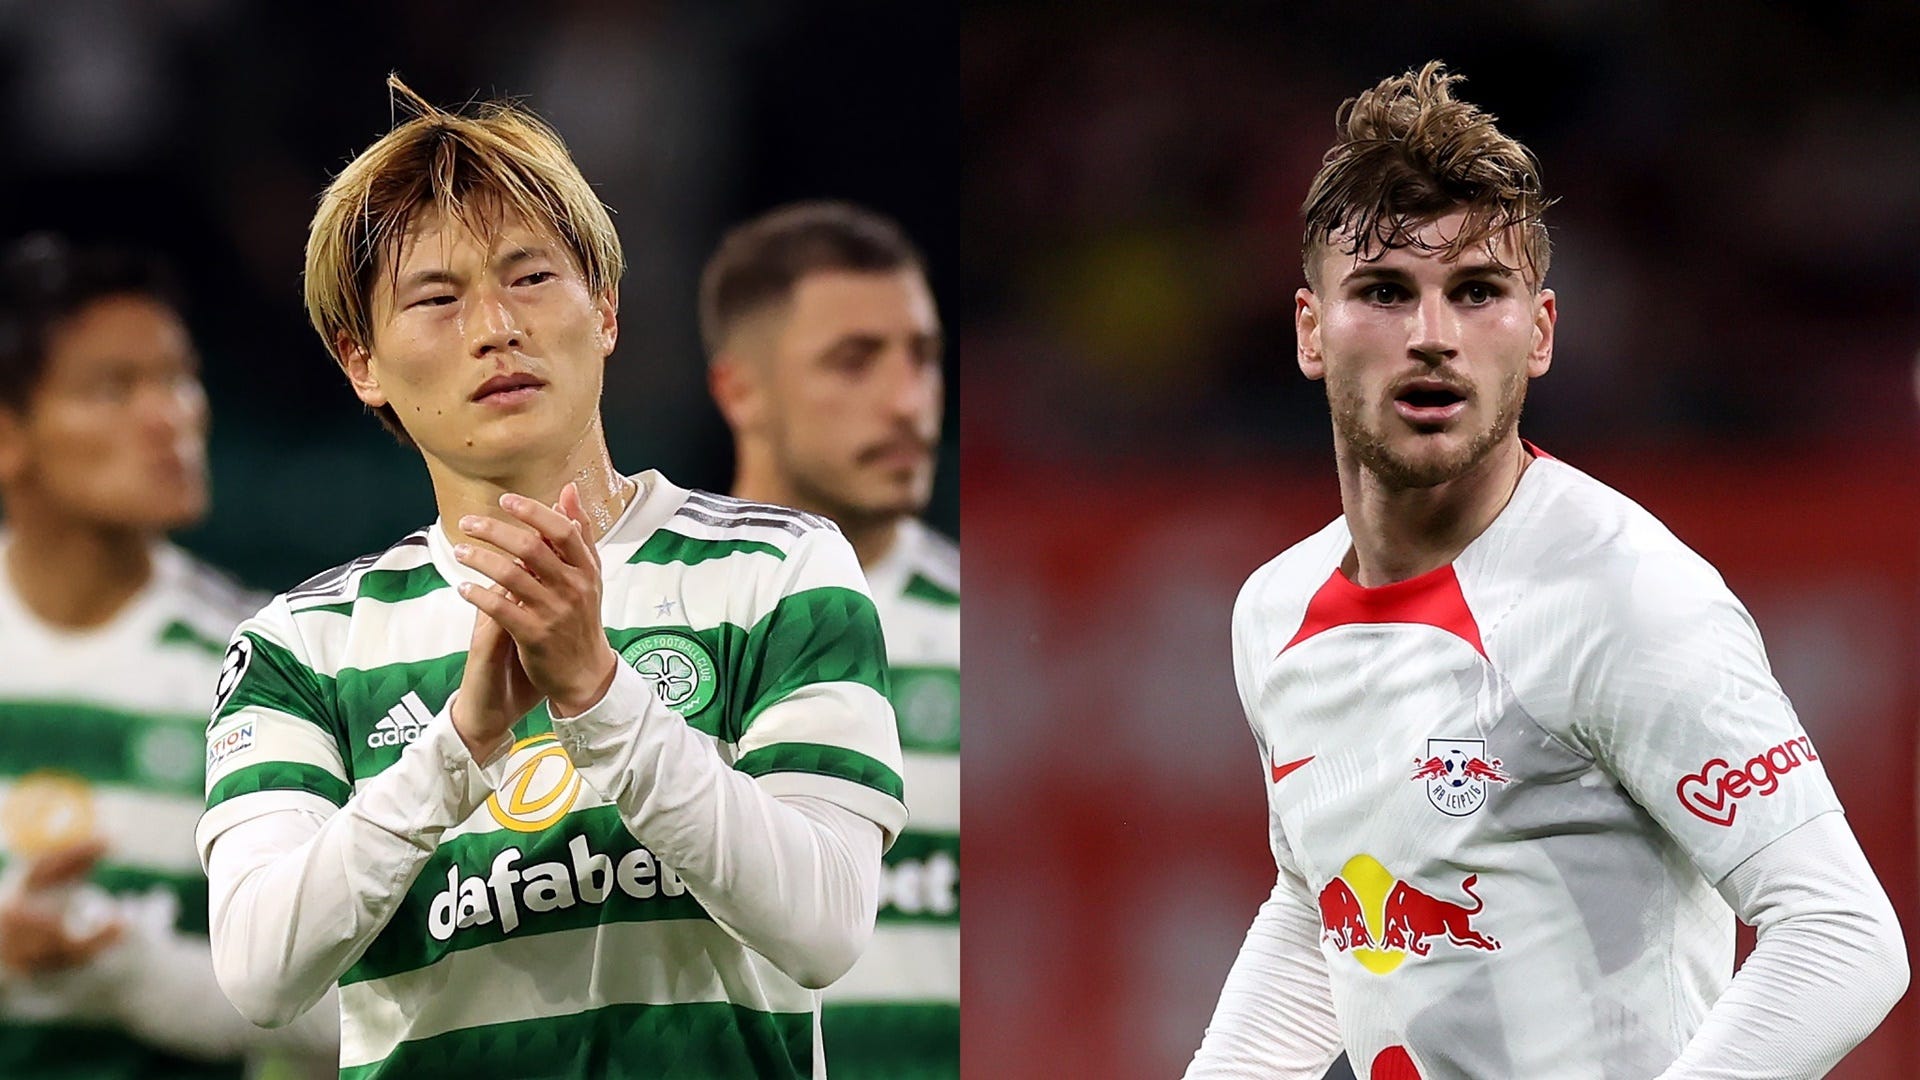 Celtic vs RB Leipzig Live stream, TV channel, kick-off time and where to watch Goal English Oman